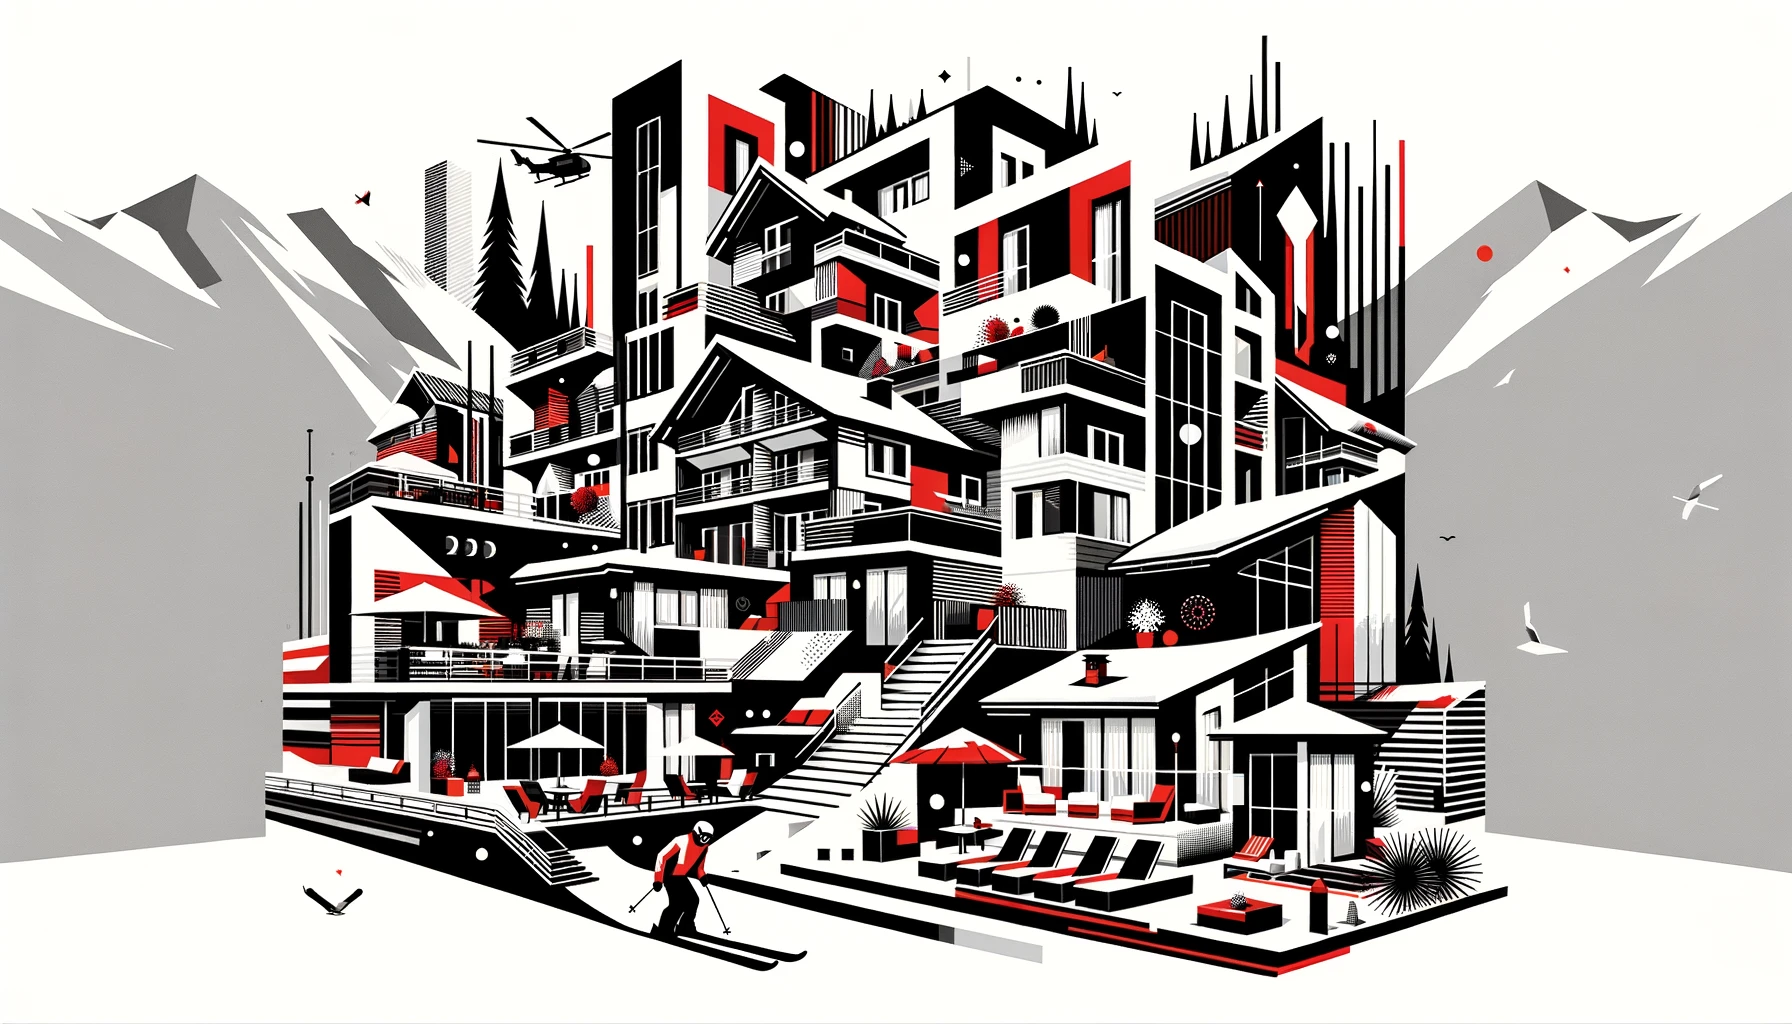 Stylized graphic of a vacation timeshare complex with skiers, showcasing modern black and red designs against a mountain backdrop.